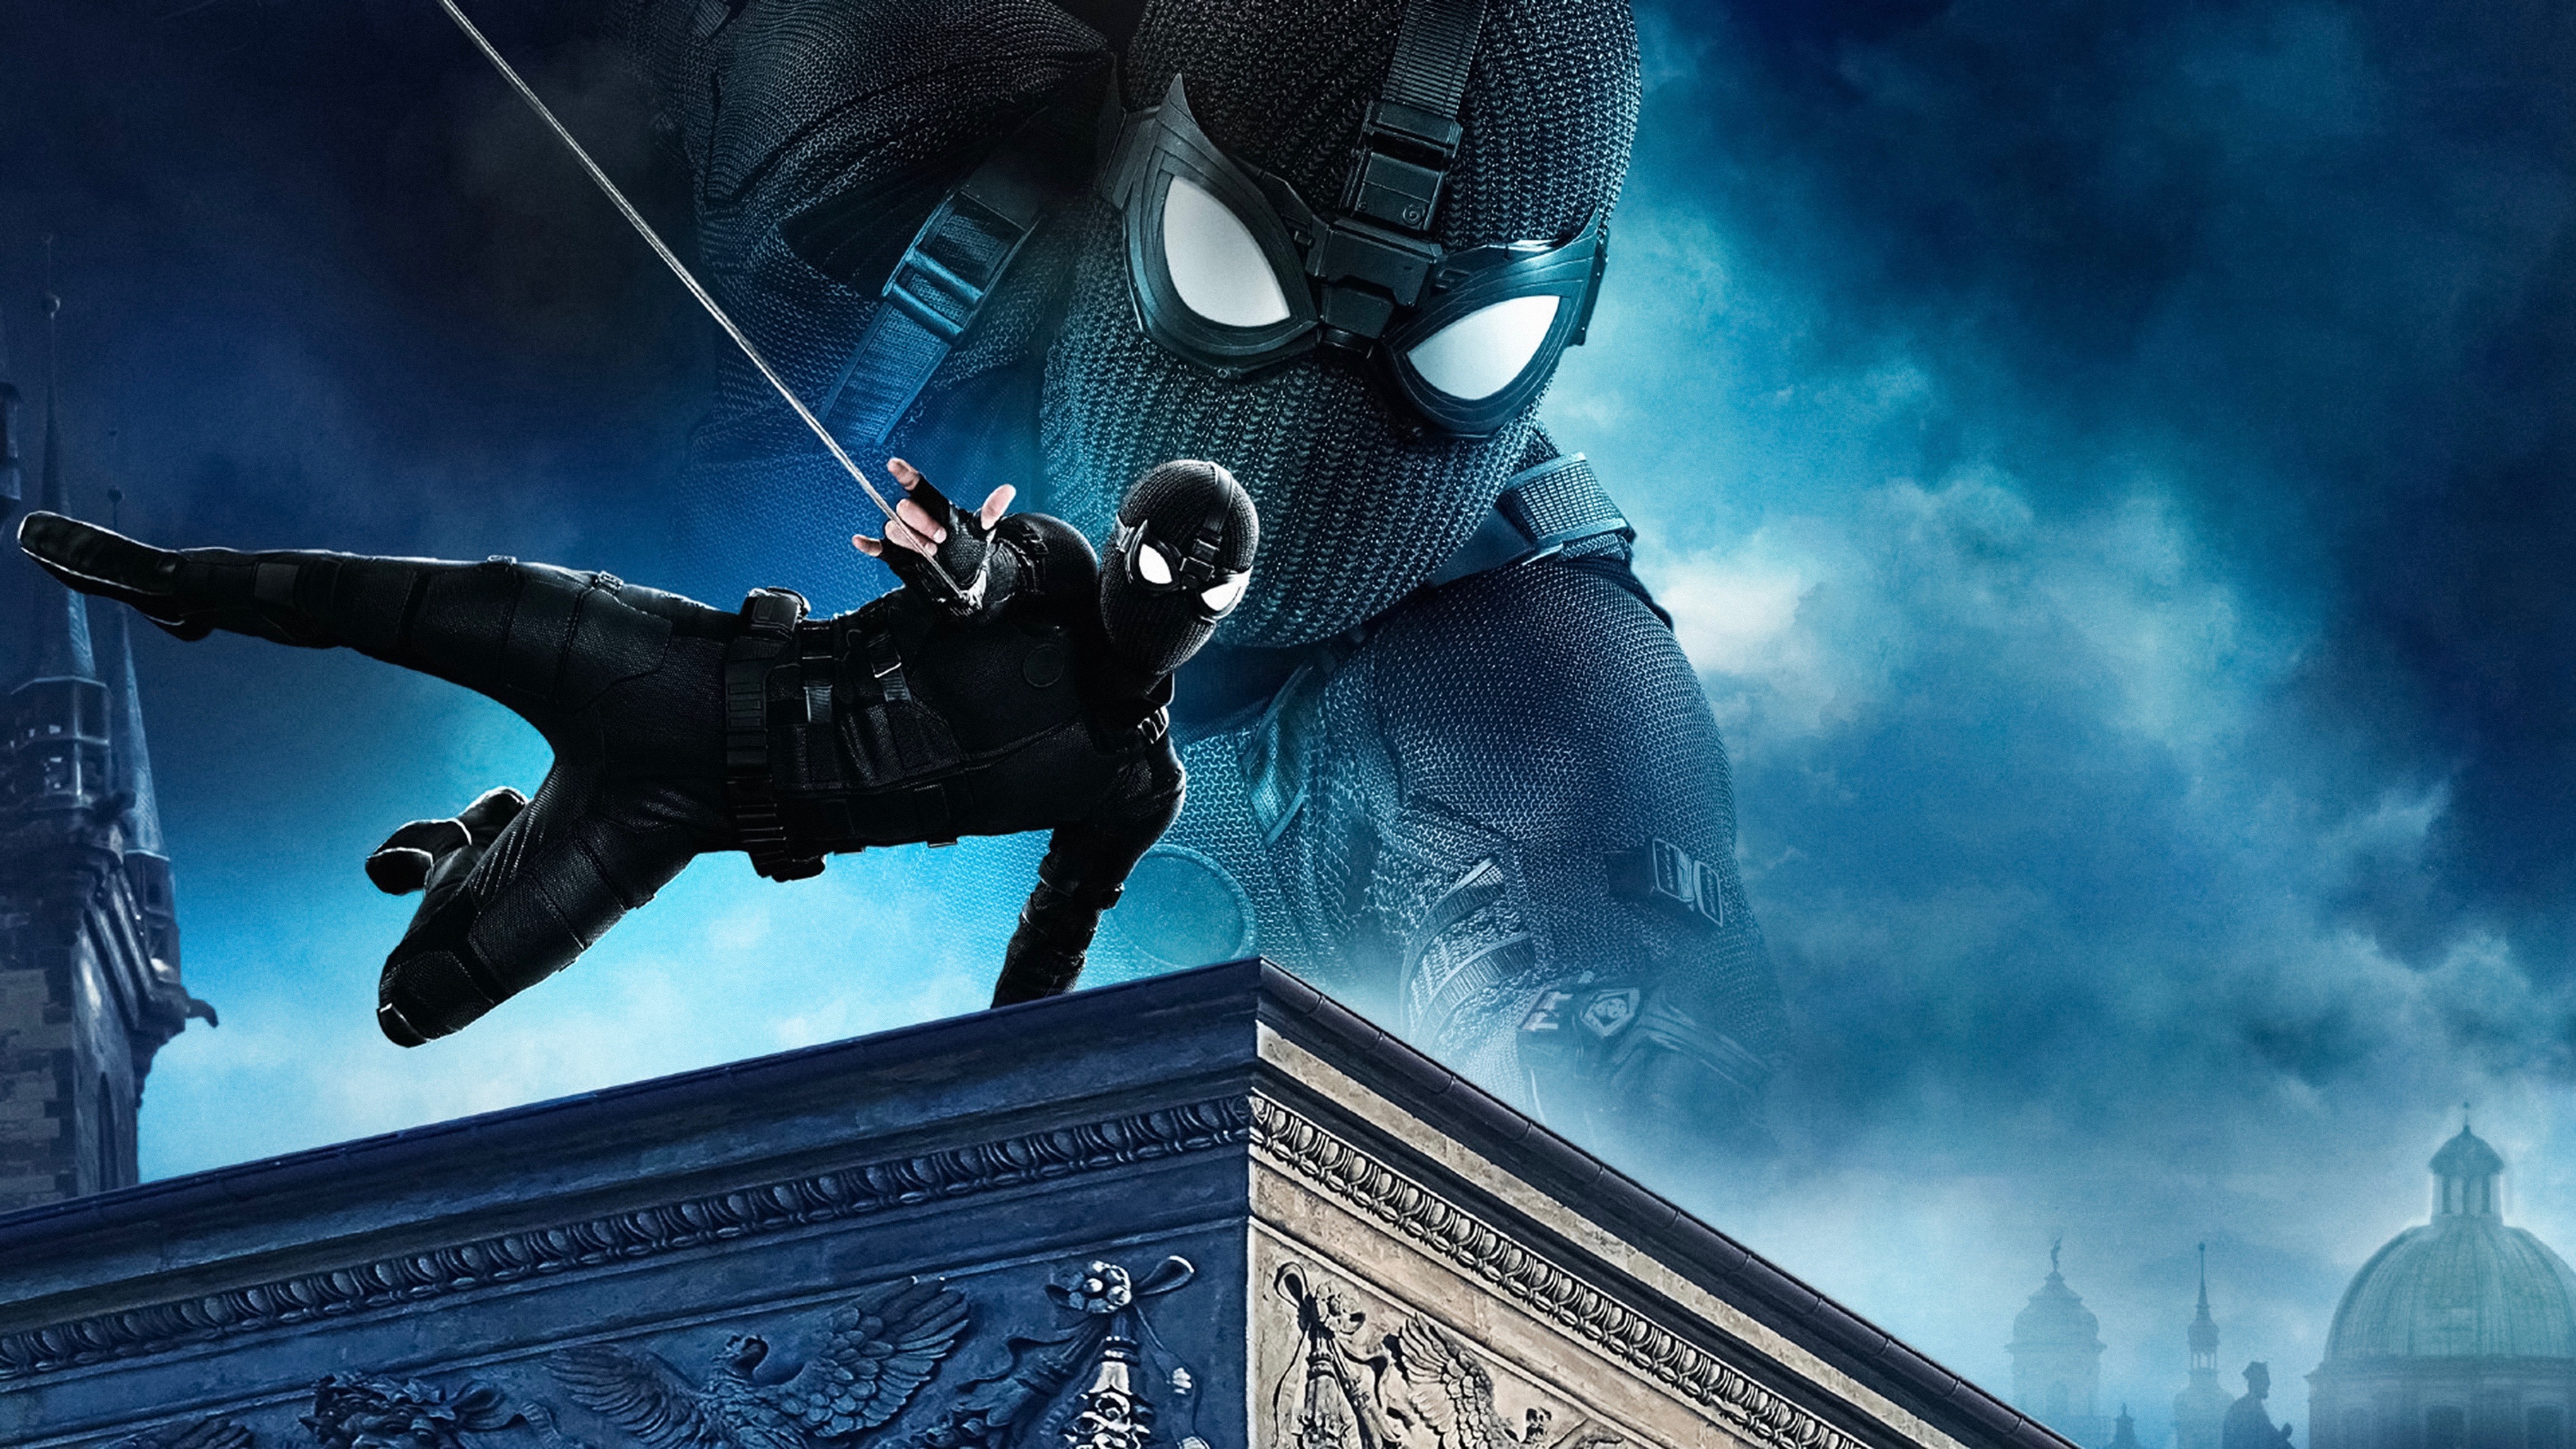 Spider Man Far From Home Stealth Suit - HD Wallpaper 